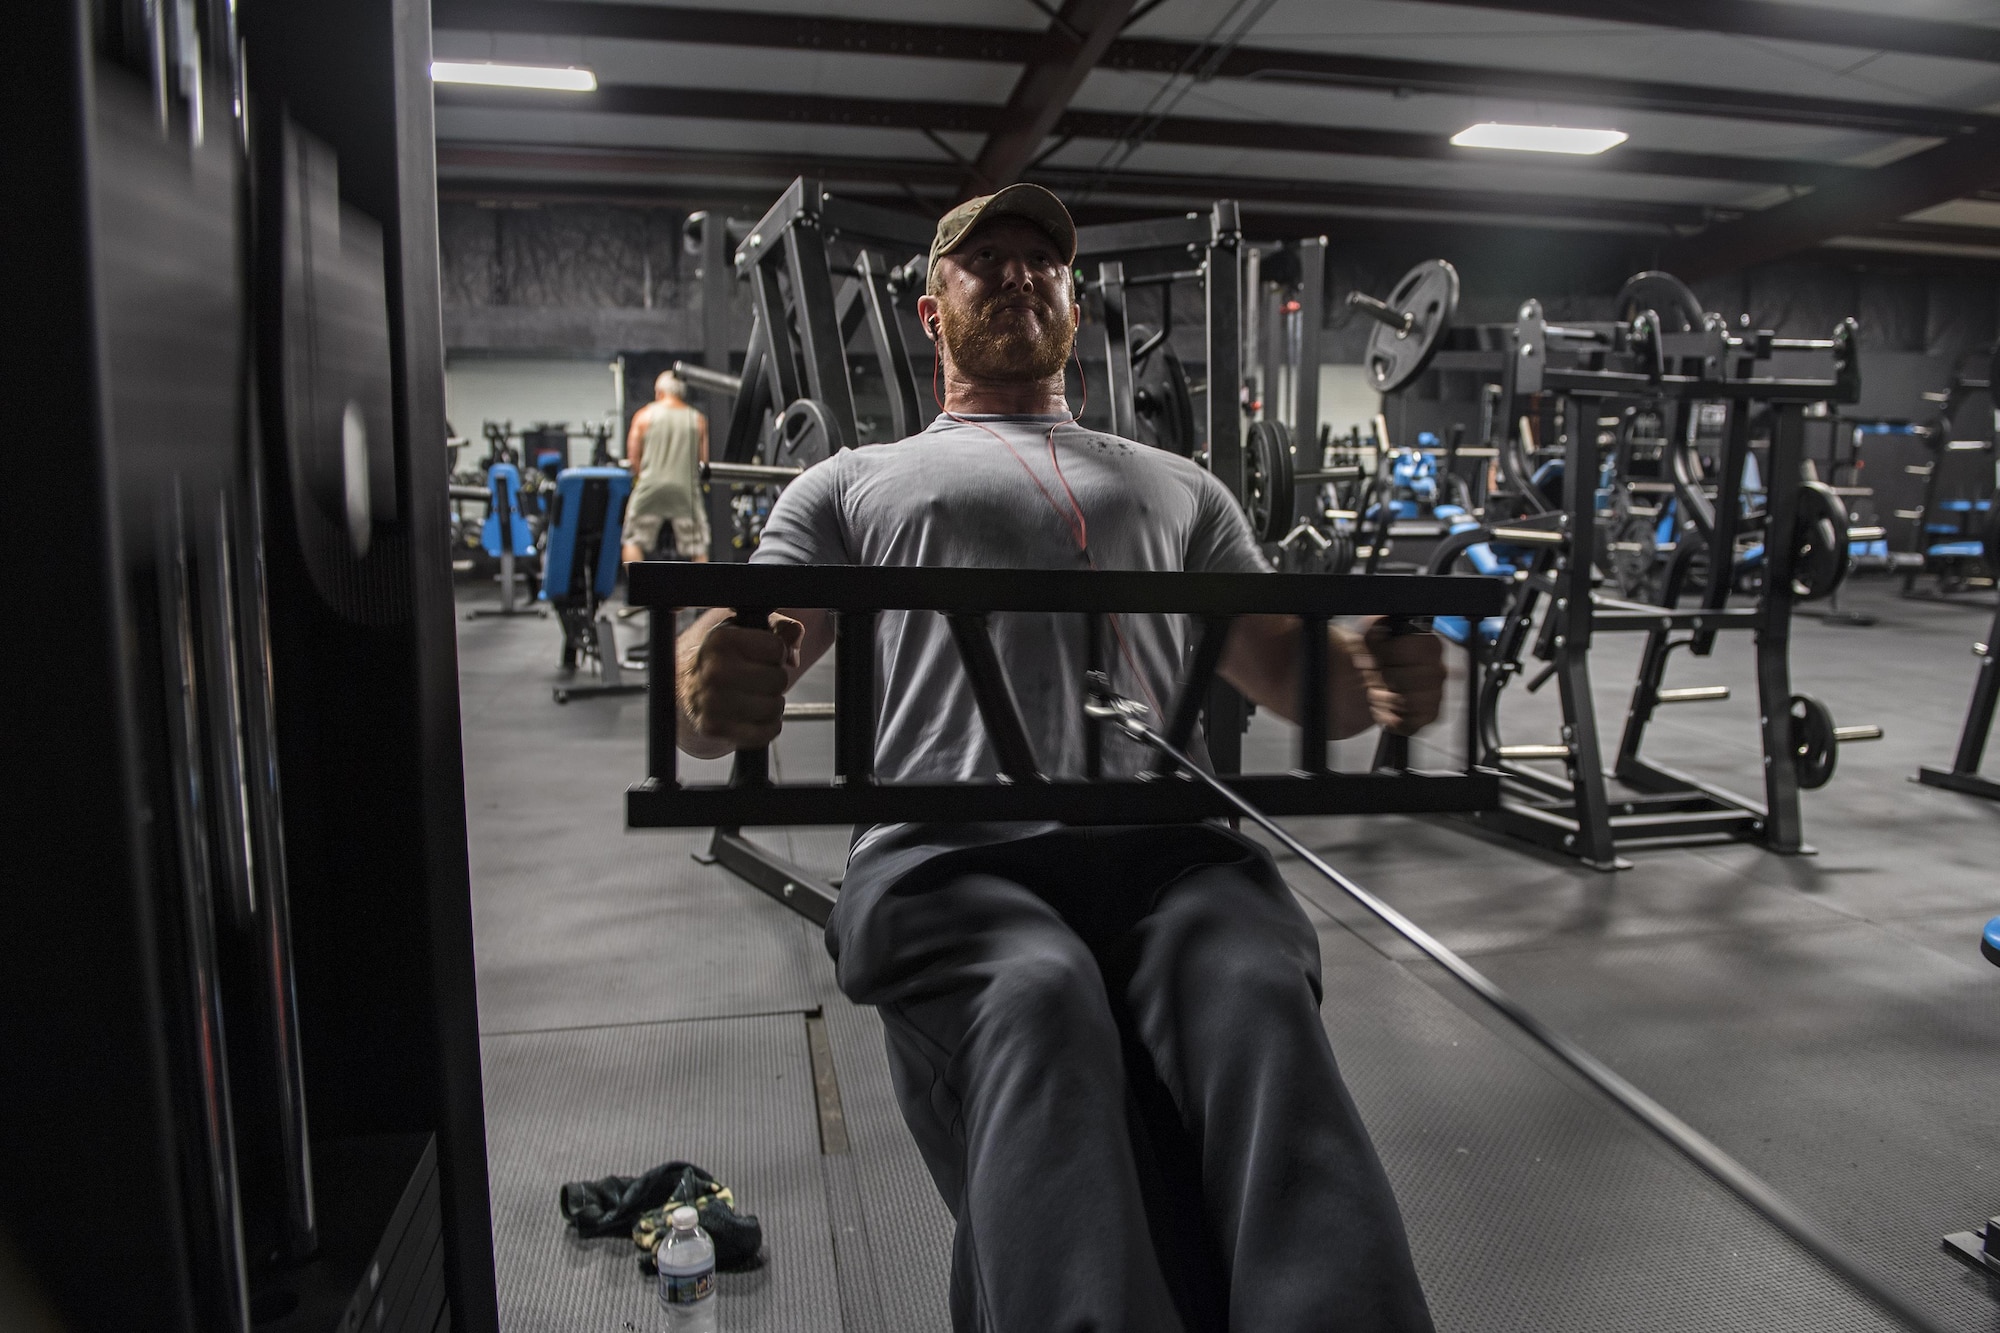 Staff Sgt. Nicholas Worley, 23d Civil Engineer Squadron electrical systems craftsman, works out, April 18, 2017, in Valdosta, Ga. In January 2012 Worley was diagnosed with Chronic Myelogenous Leukemia, an uncommon form of blood-cell cancer that starts in the blood-forming bone marrow cells. He’s currently in remission and goes to the cancer center every three months to ensure his treatment is still working. “The gym plays a major part in my remission status because I can see my body progressing and getting stronger and I know I’m not feeling sick,” said Worley. (U.S. Air Force Photo by Senior Airman Janiqua P. Robinson)